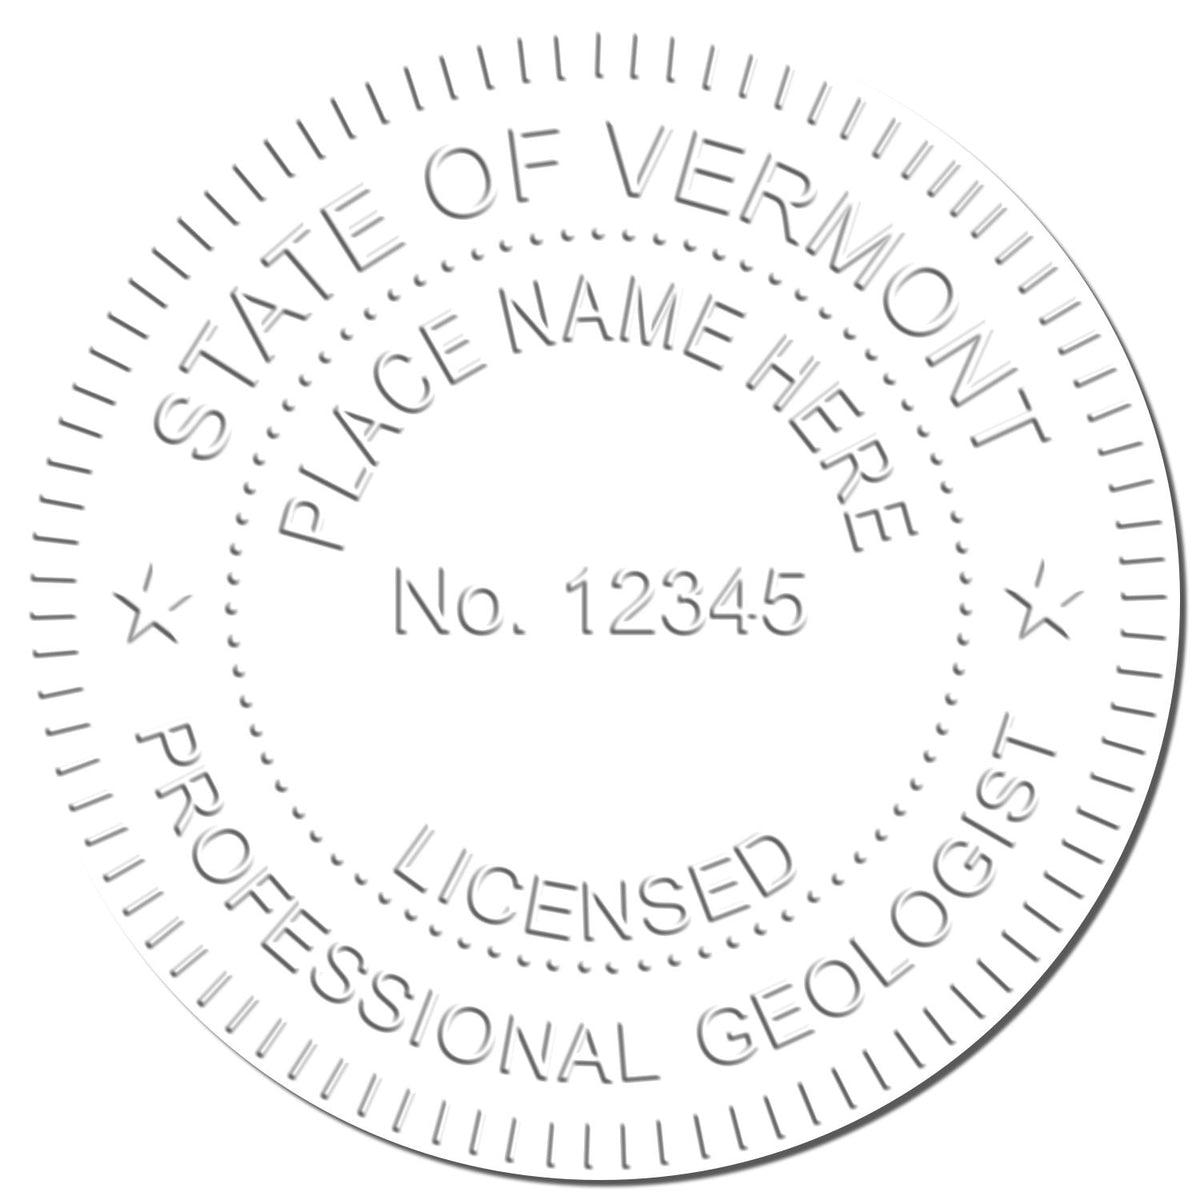 A photograph of the State of Vermont Extended Long Reach Geologist Seal stamp impression reveals a vivid, professional image of the on paper.